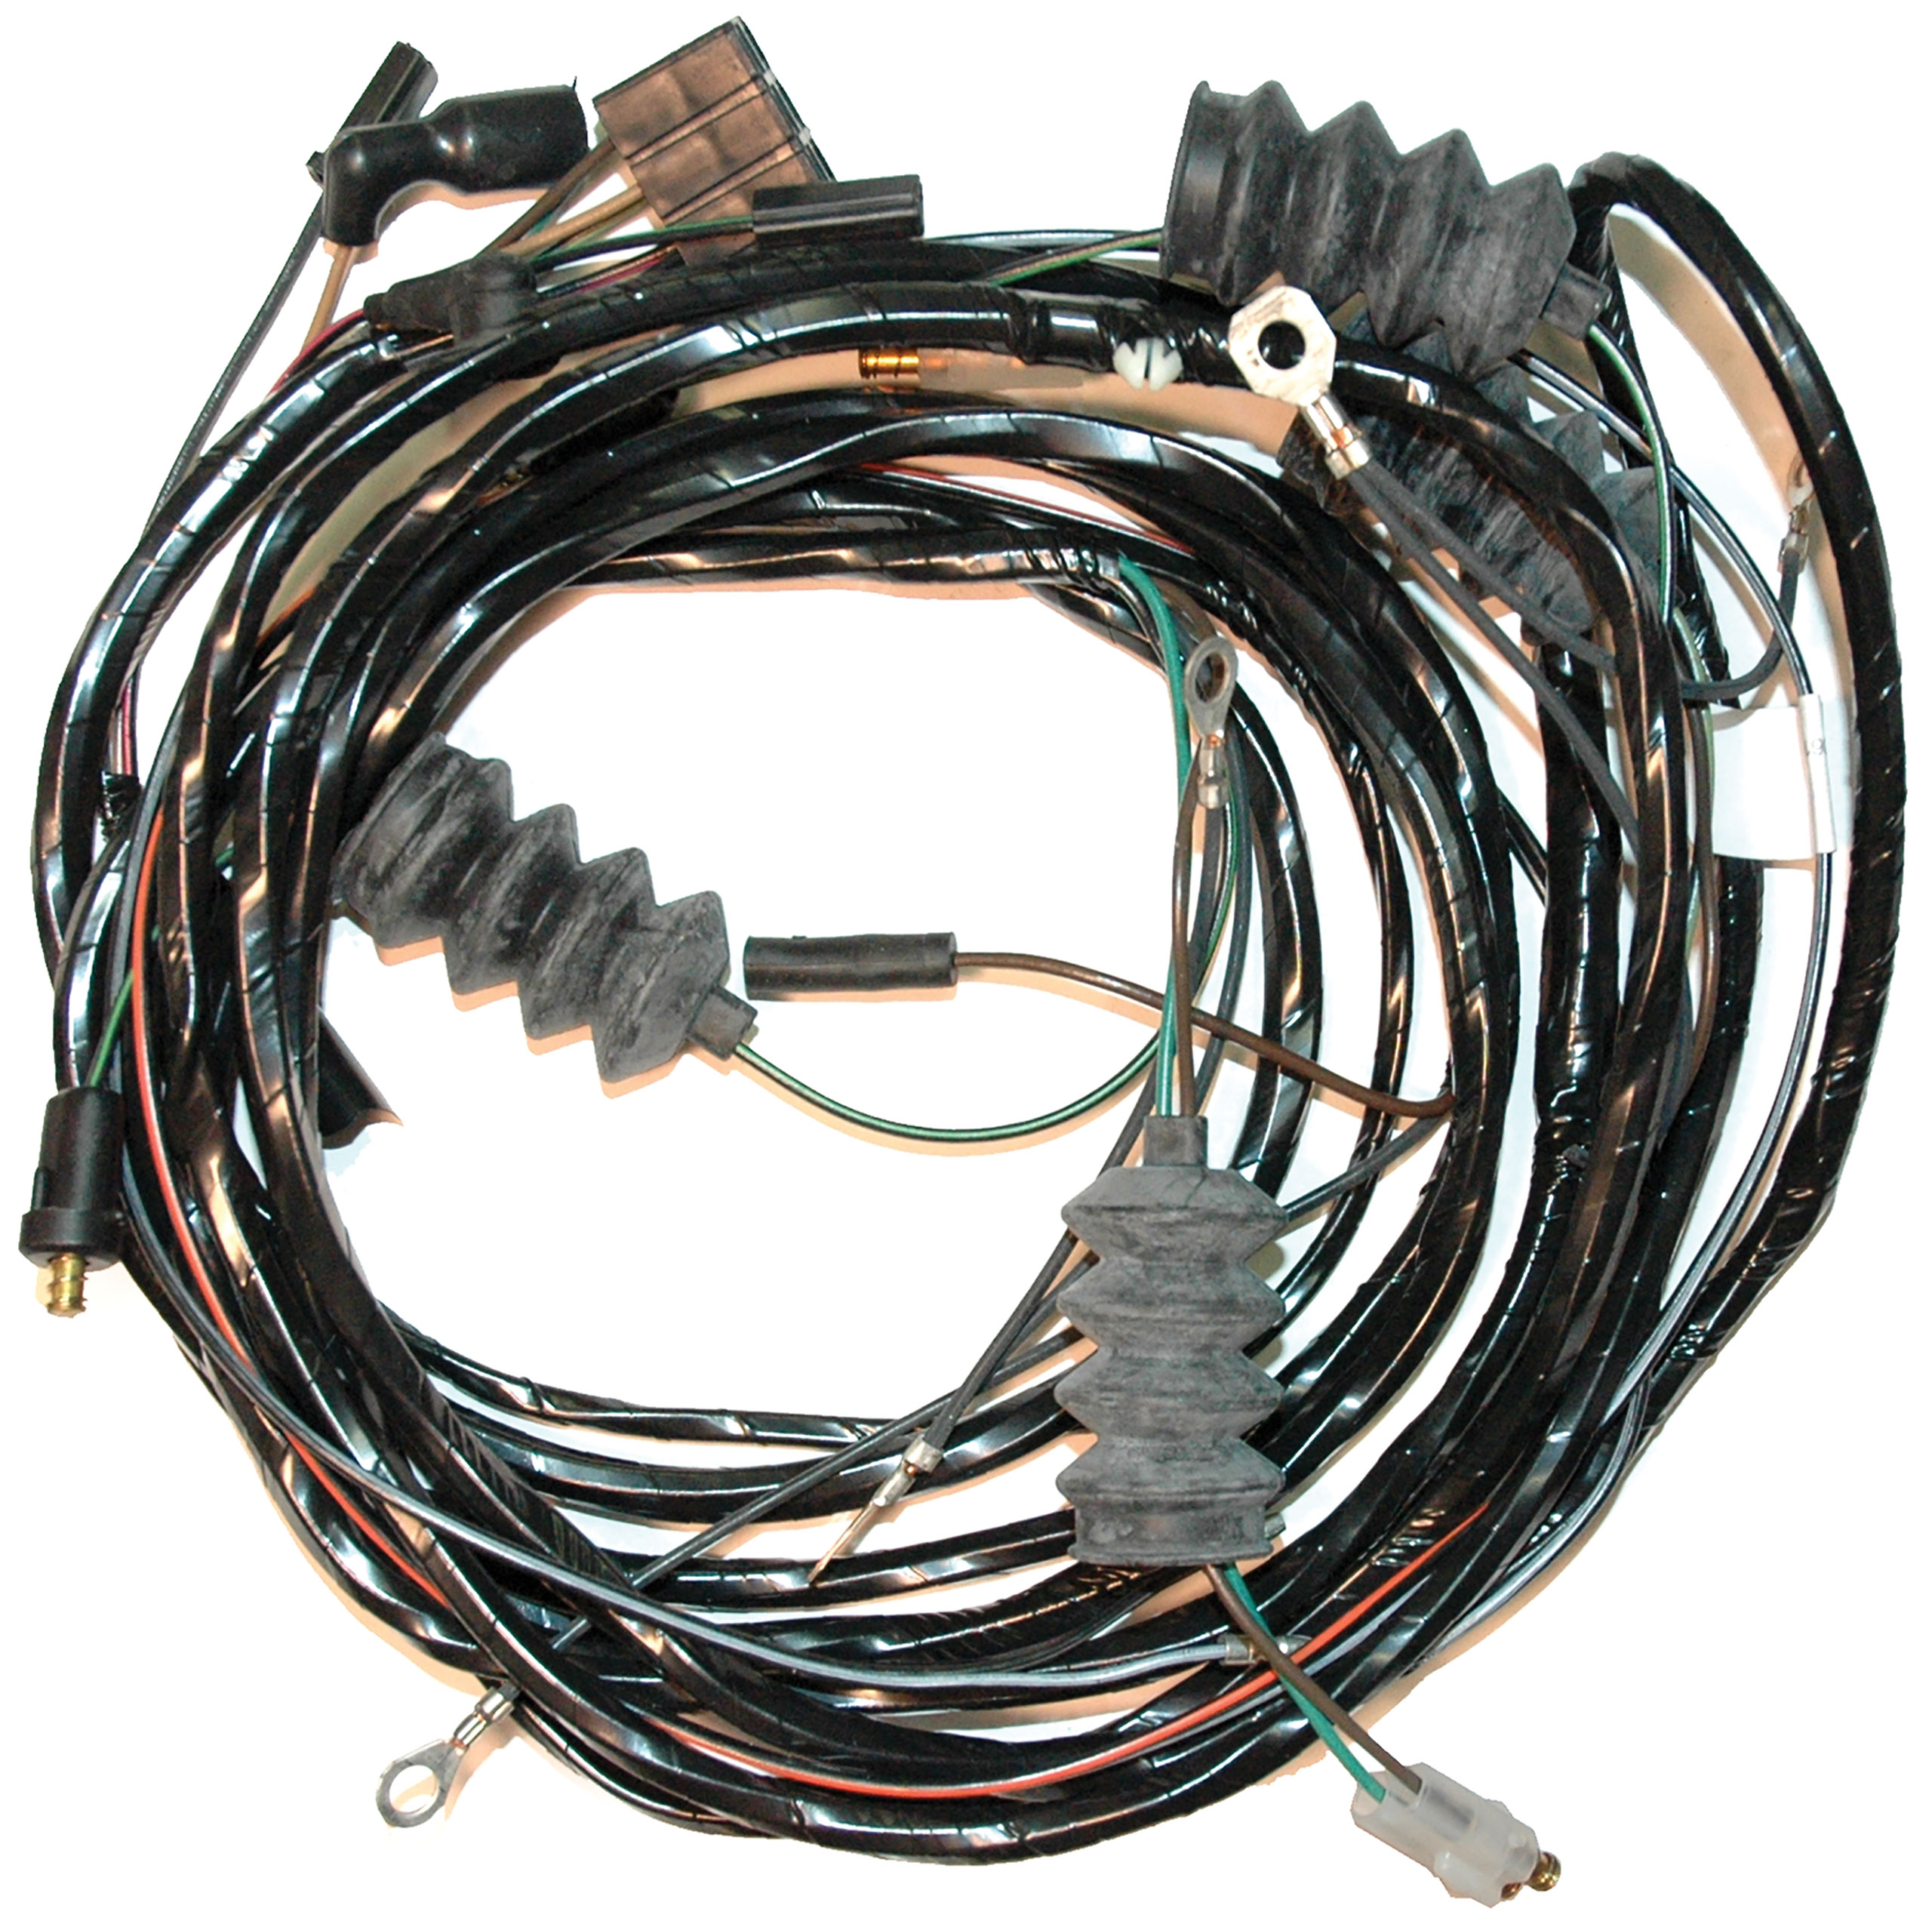 C2 1964 Chevrolet Corvette Harness. Rear W/Back Up Lamps - Convertible Or 36 Gallon Coupe - Lectric Limited, Inc.